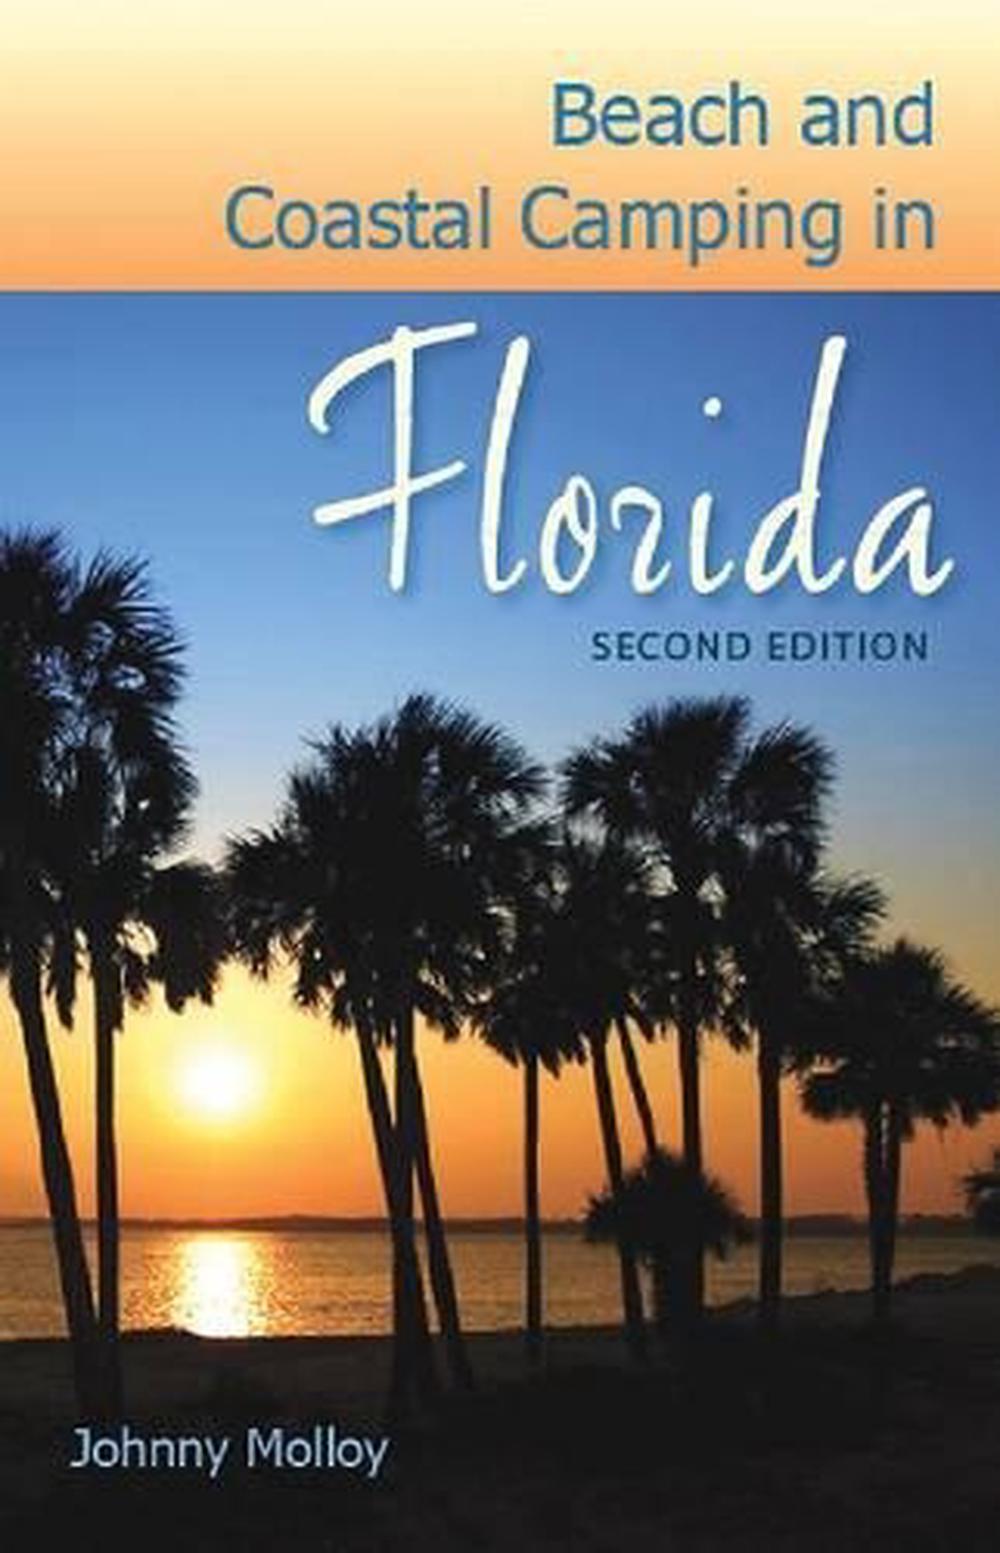 Beach and Coastal Camping in Florida by Johnny Molloy 